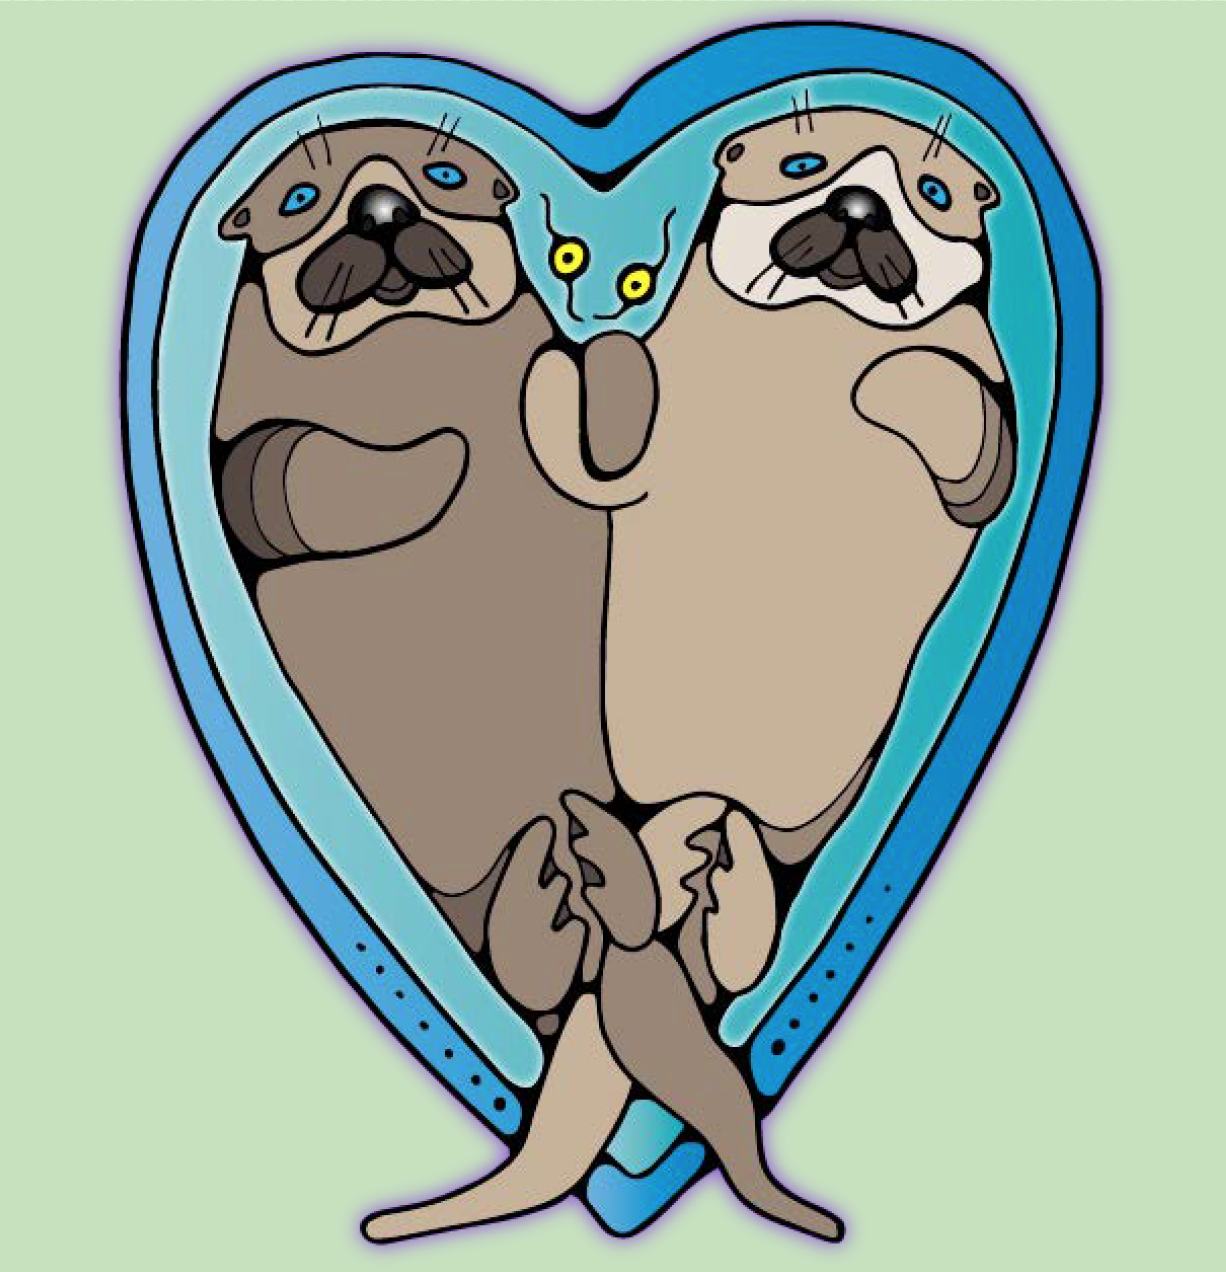 An illustration of two otters on their backs holding paws inside a heart shape by artist, Dolly Peltier.